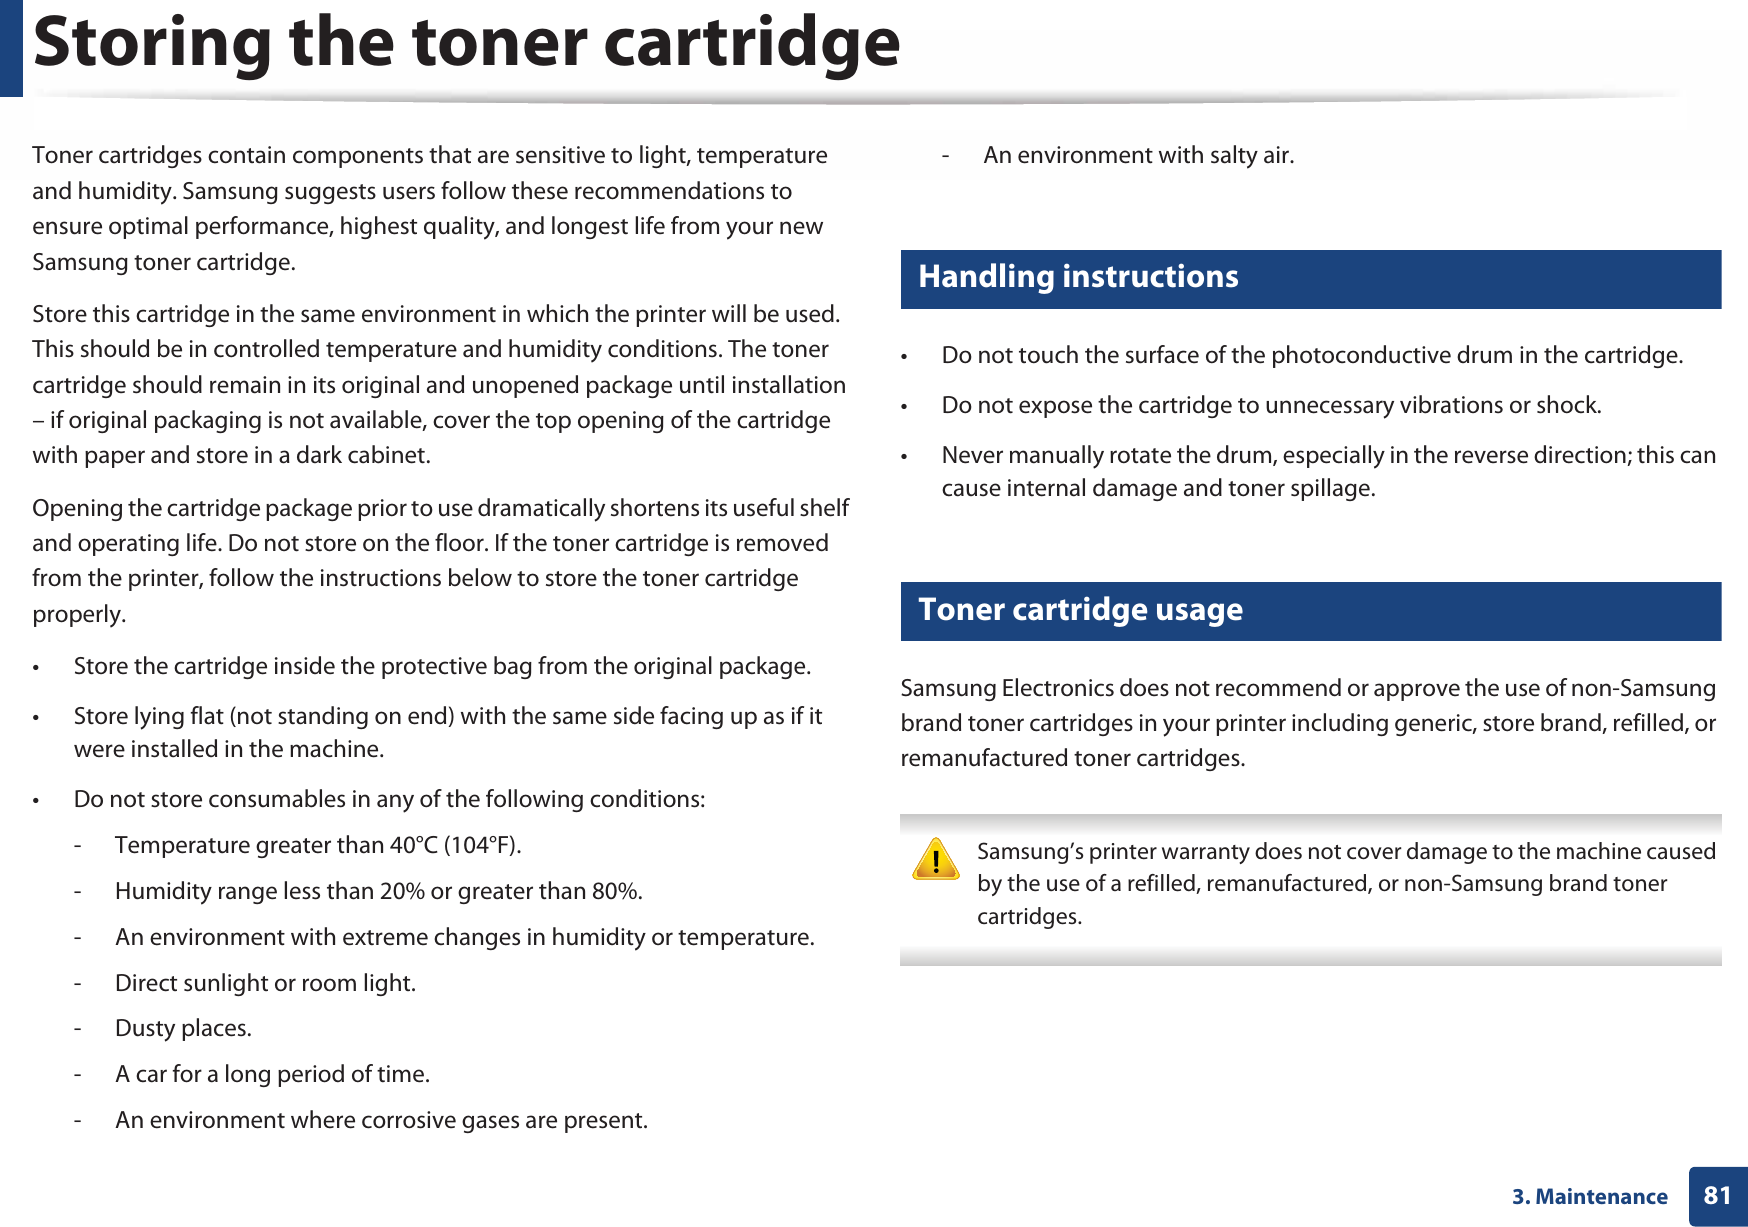 813. MaintenanceStoring the toner cartridgeToner cartridges contain components that are sensitive to light, temperature and humidity. Samsung suggests users follow these recommendations to ensure optimal performance, highest quality, and longest life from your new Samsung toner cartridge.Store this cartridge in the same environment in which the printer will be used. This should be in controlled temperature and humidity conditions. The toner cartridge should remain in its original and unopened package until installation – if original packaging is not available, cover the top opening of the cartridge with paper and store in a dark cabinet.Opening the cartridge package prior to use dramatically shortens its useful shelf and operating life. Do not store on the floor. If the toner cartridge is removed from the printer, follow the instructions below to store the toner cartridge properly.• Store the cartridge inside the protective bag from the original package. • Store lying flat (not standing on end) with the same side facing up as if it were installed in the machine.• Do not store consumables in any of the following conditions:- Temperature greater than 40°C (104°F).- Humidity range less than 20% or greater than 80%.- An environment with extreme changes in humidity or temperature.- Direct sunlight or room light.- Dusty places.- A car for a long period of time.- An environment where corrosive gases are present.- An environment with salty air.1 Handling instructions• Do not touch the surface of the photoconductive drum in the cartridge.• Do not expose the cartridge to unnecessary vibrations or shock.• Never manually rotate the drum, especially in the reverse direction; this can cause internal damage and toner spillage.2 Toner cartridge usageSamsung Electronics does not recommend or approve the use of non-Samsung brand toner cartridges in your printer including generic, store brand, refilled, or remanufactured toner cartridges. Samsung’s printer warranty does not cover damage to the machine caused by the use of a refilled, remanufactured, or non-Samsung brand toner cartridges. 